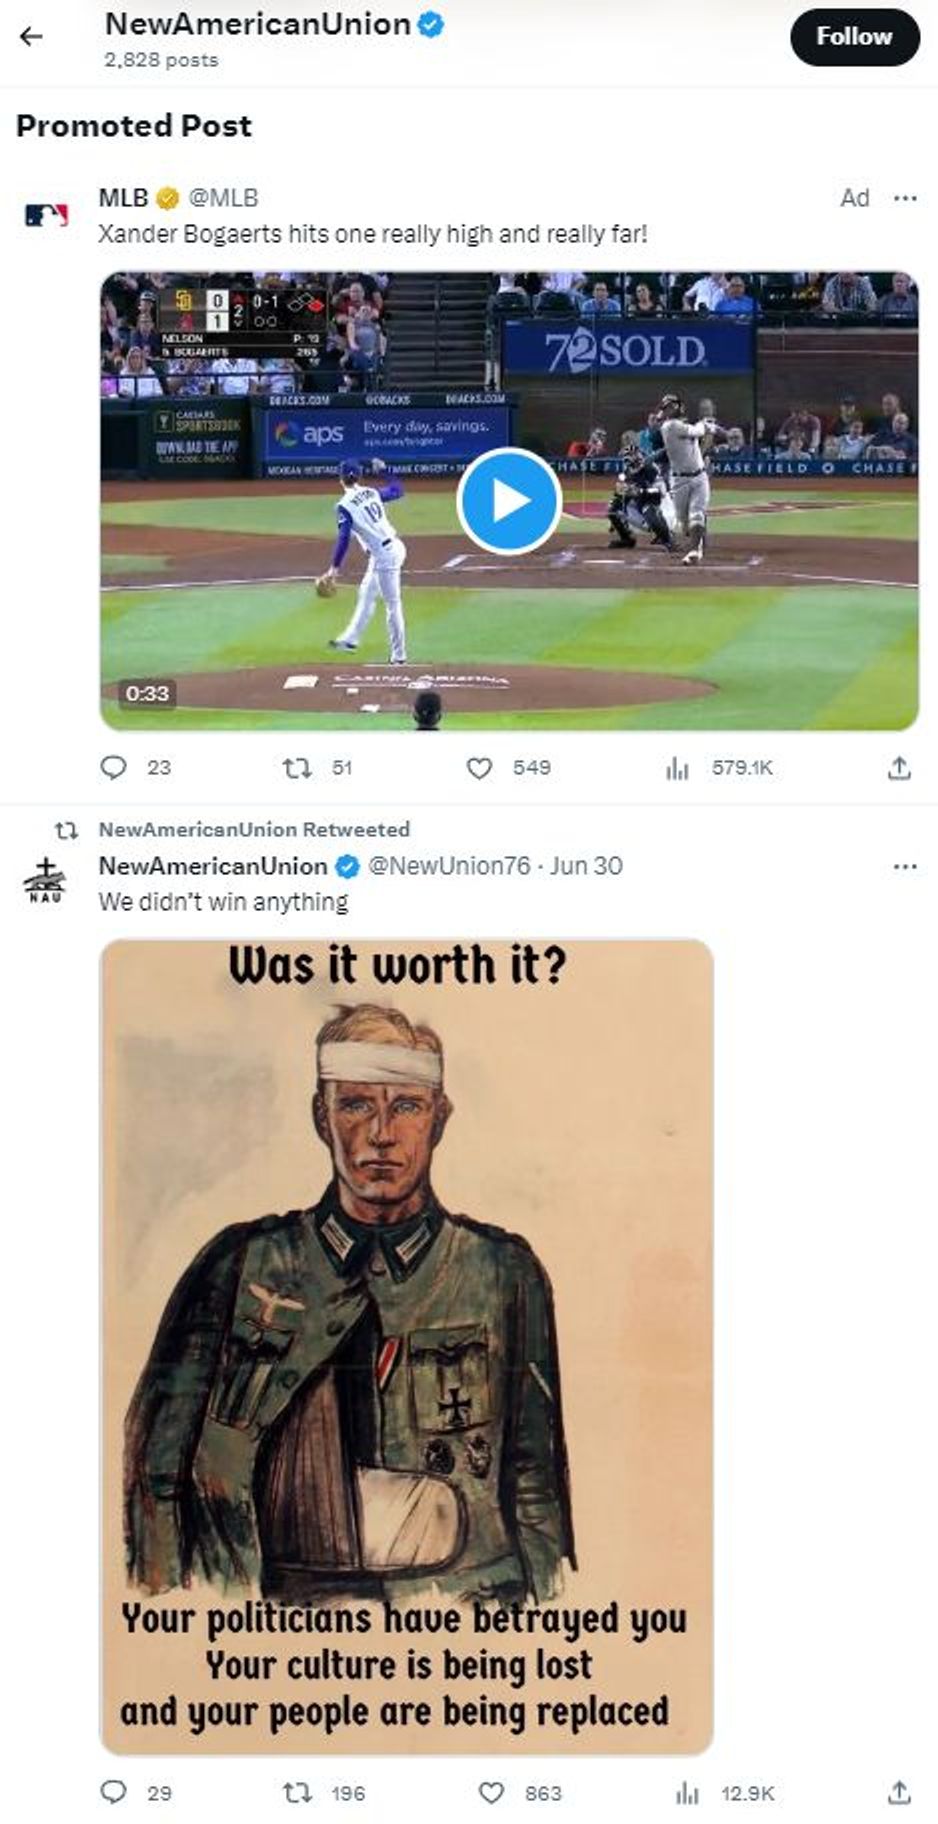 An example of Major League Baseball (MLB) ads in the same feed as tweets from an account glorifying Hitler.